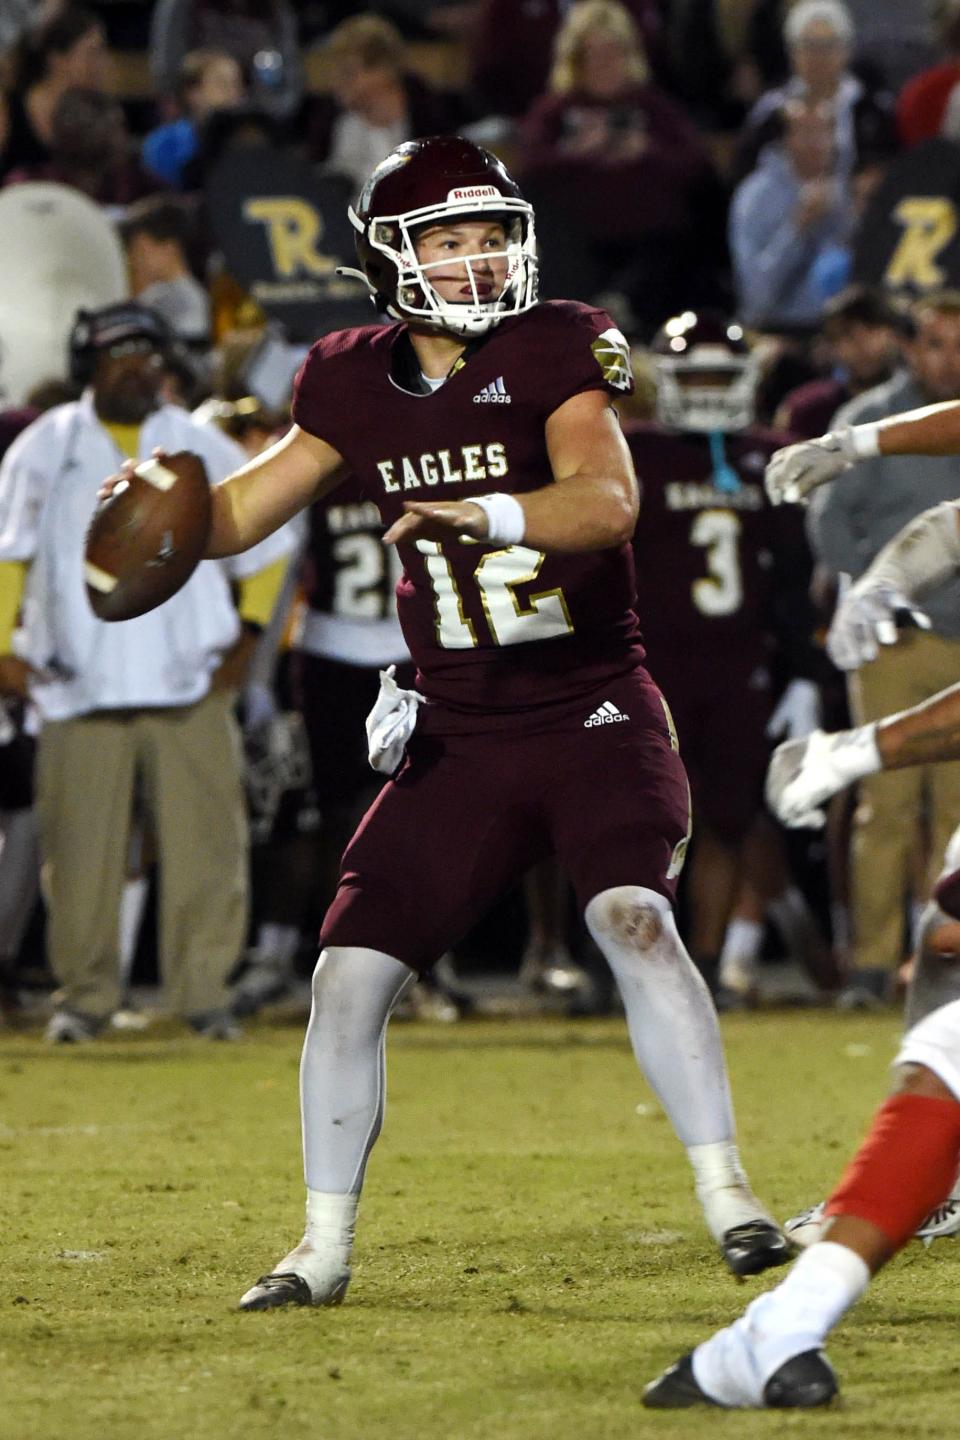 Niceville High School quarterback Harrison Orr looks downfield to pass  during the Eagles playoff game against Crestview High School on Friday, Nov. 11, 2022.